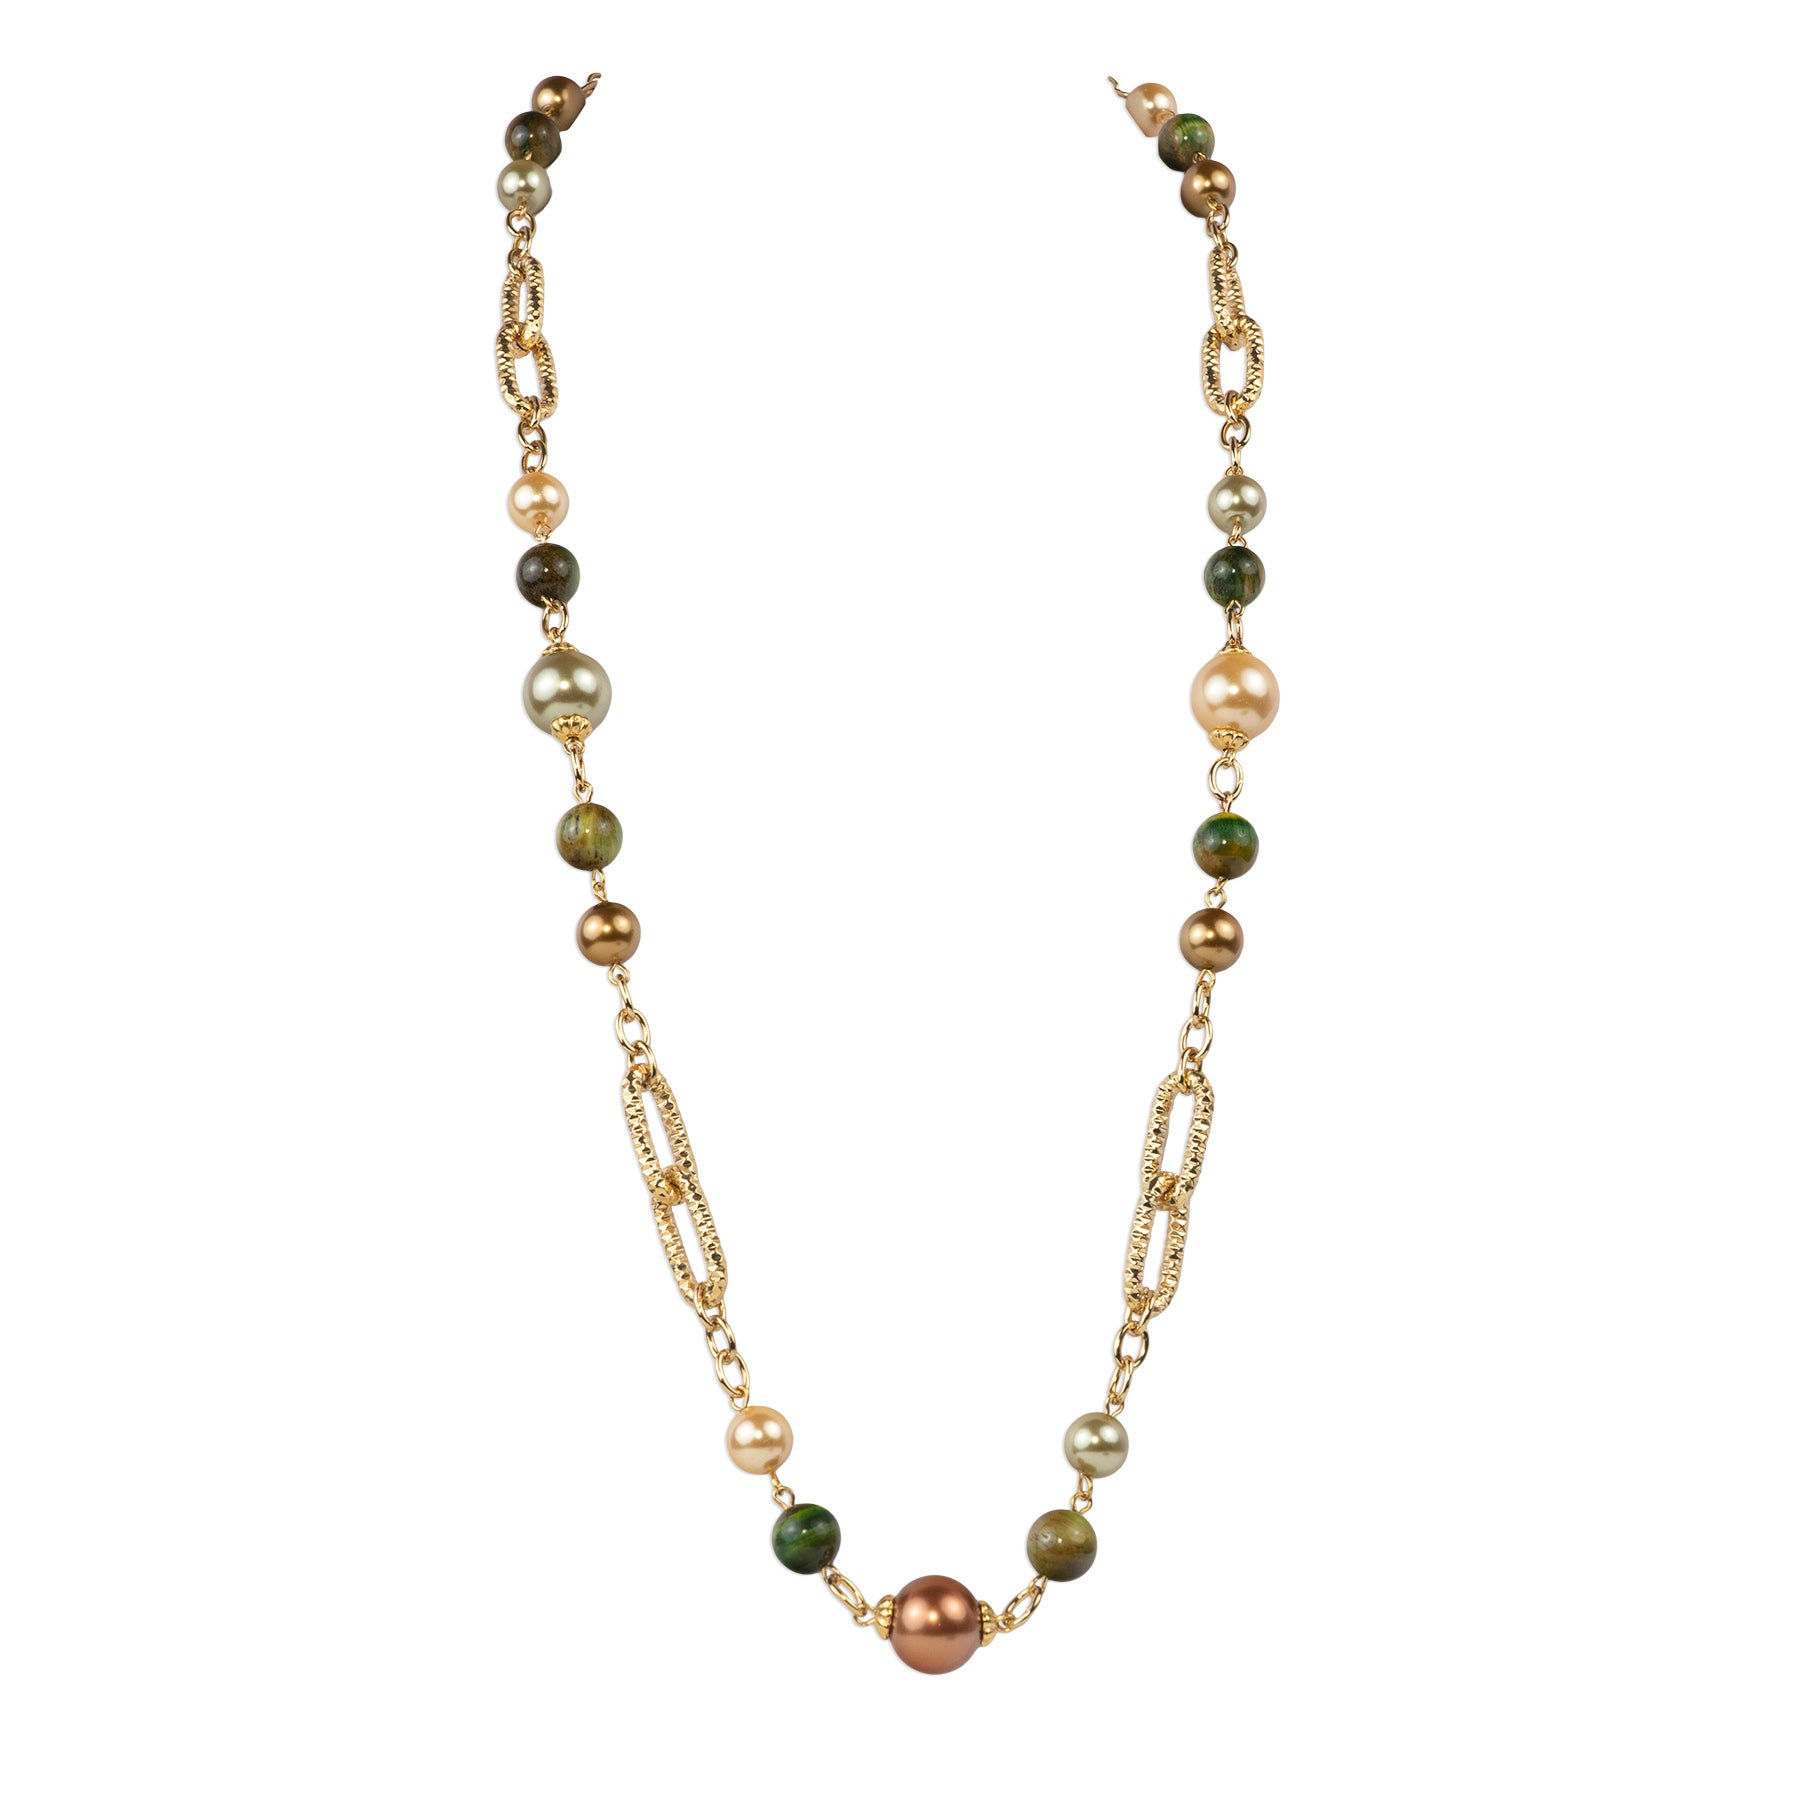 Long chain necklace with semiprecious stones and pearls